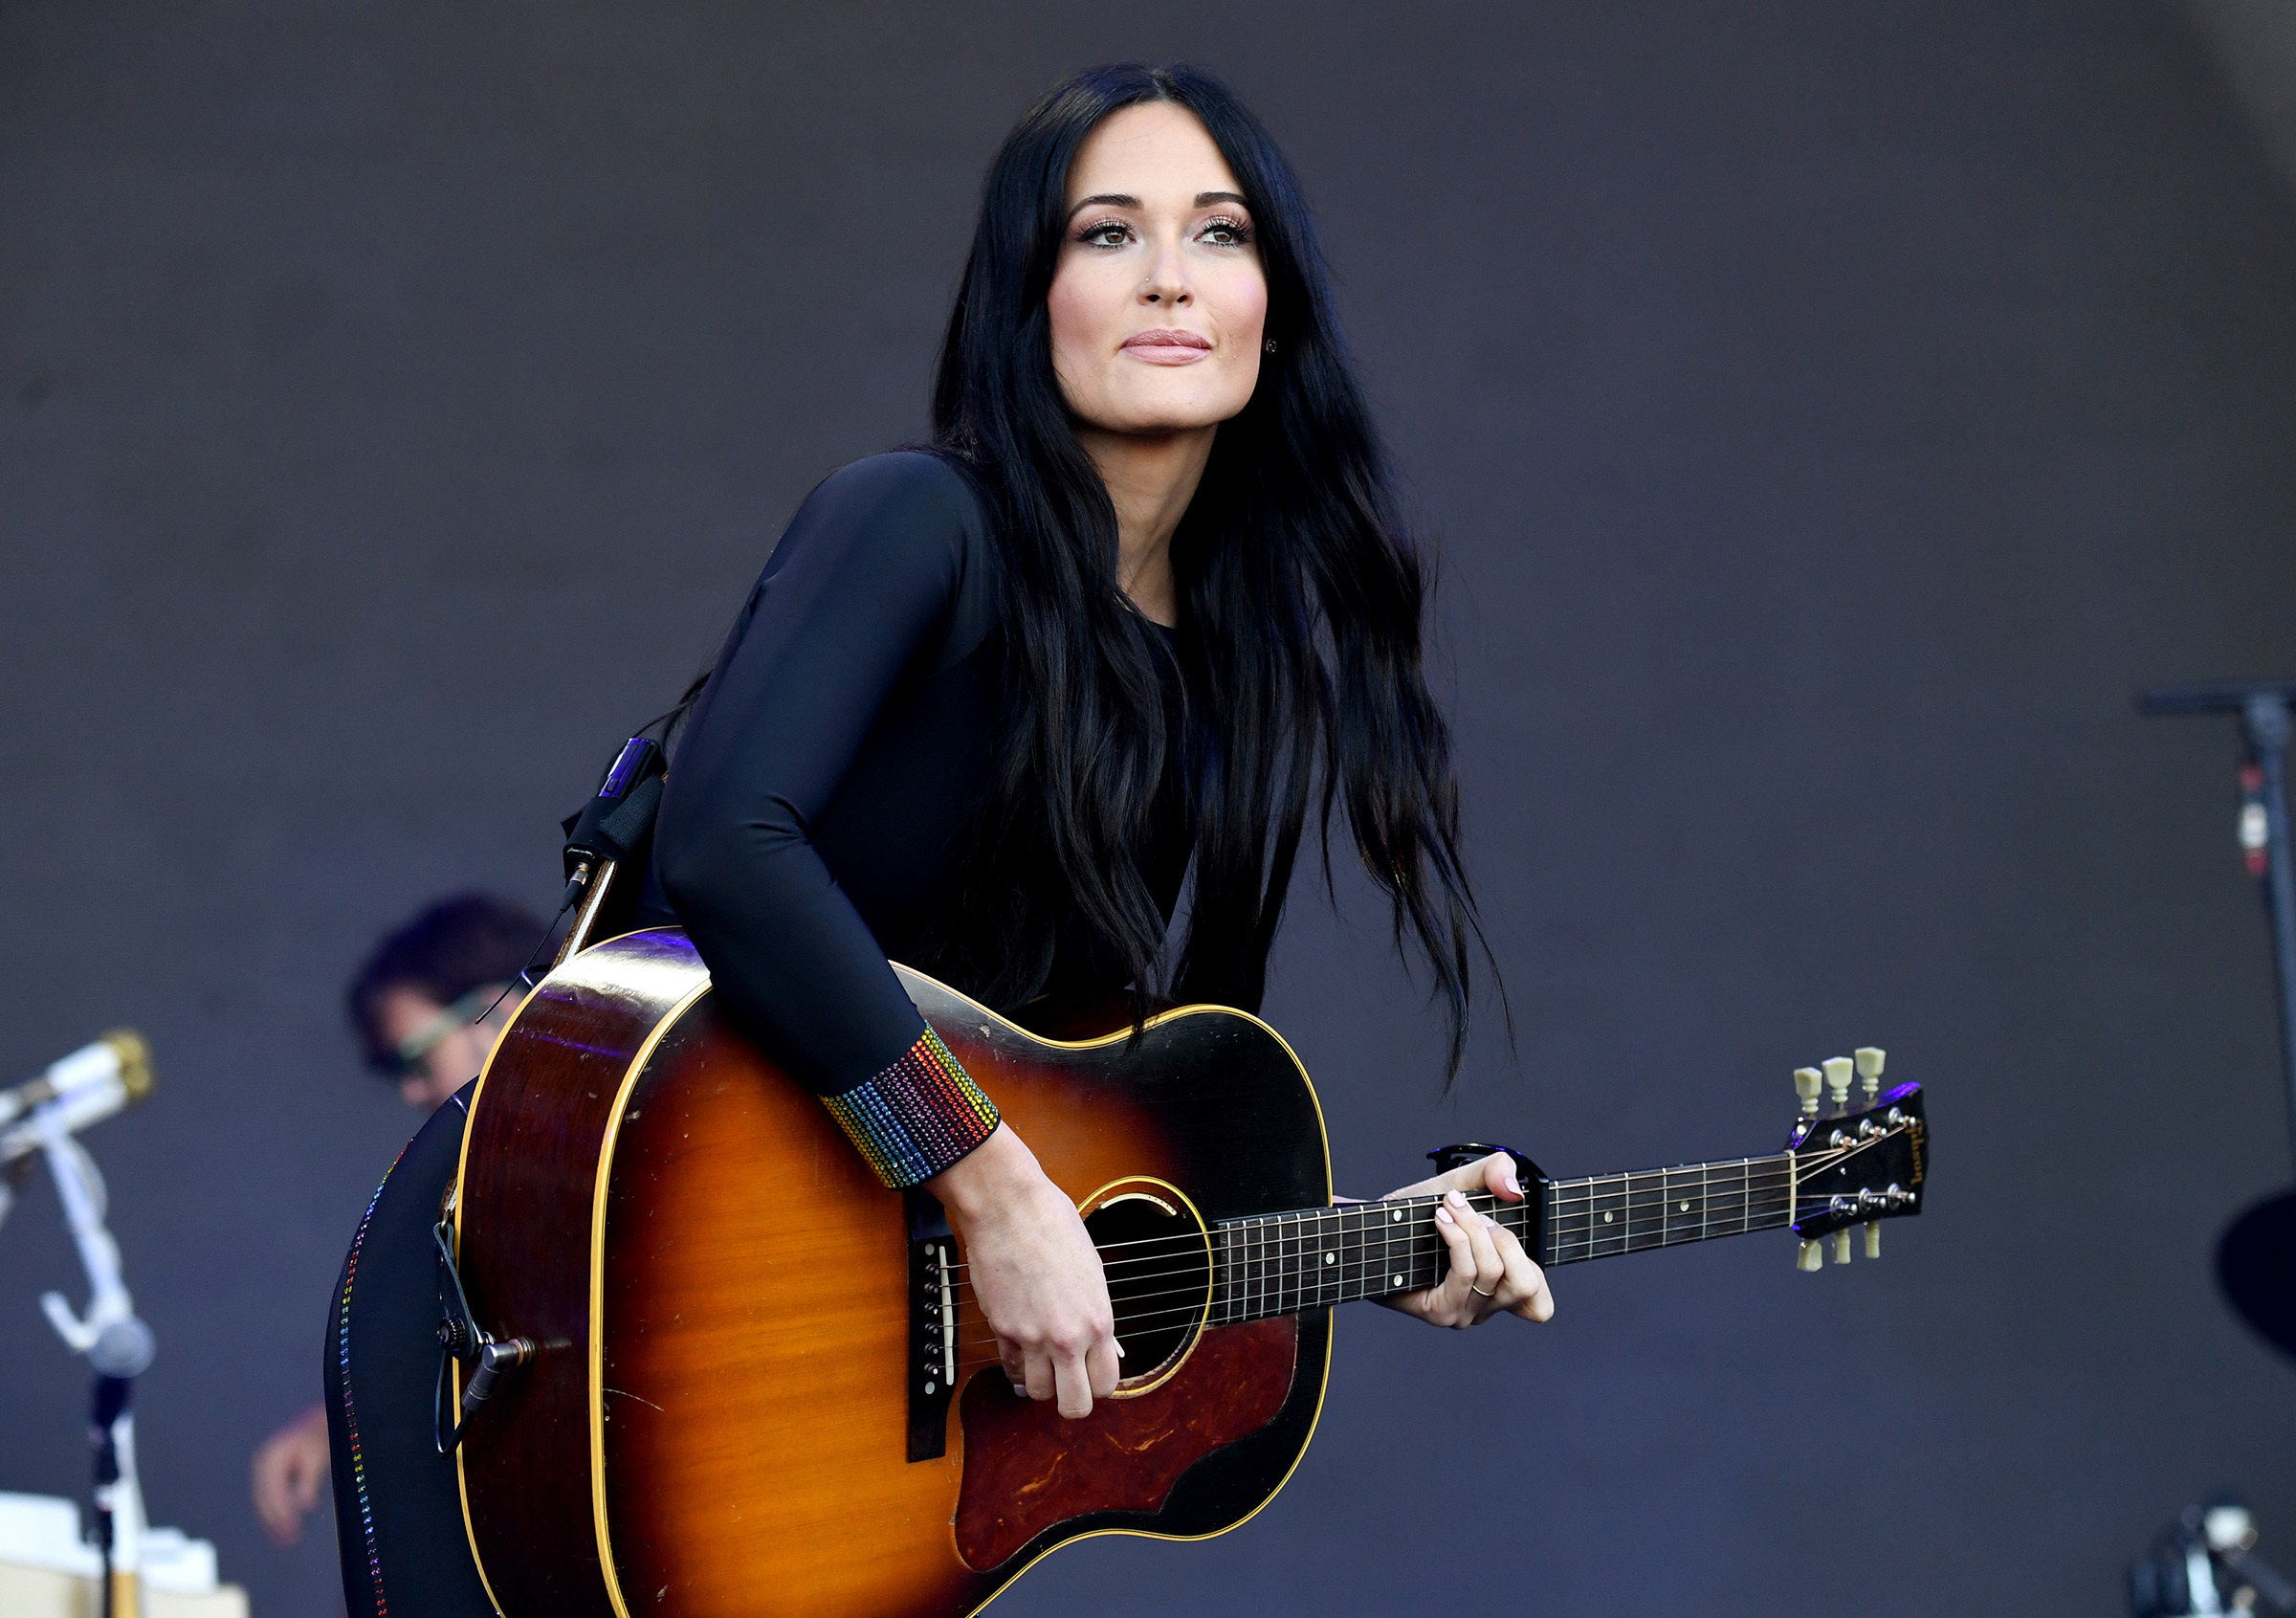 The winner of the 2019 Album of the Year Grammy Award, Musgraves has built a following without the aid of mainstream radio.